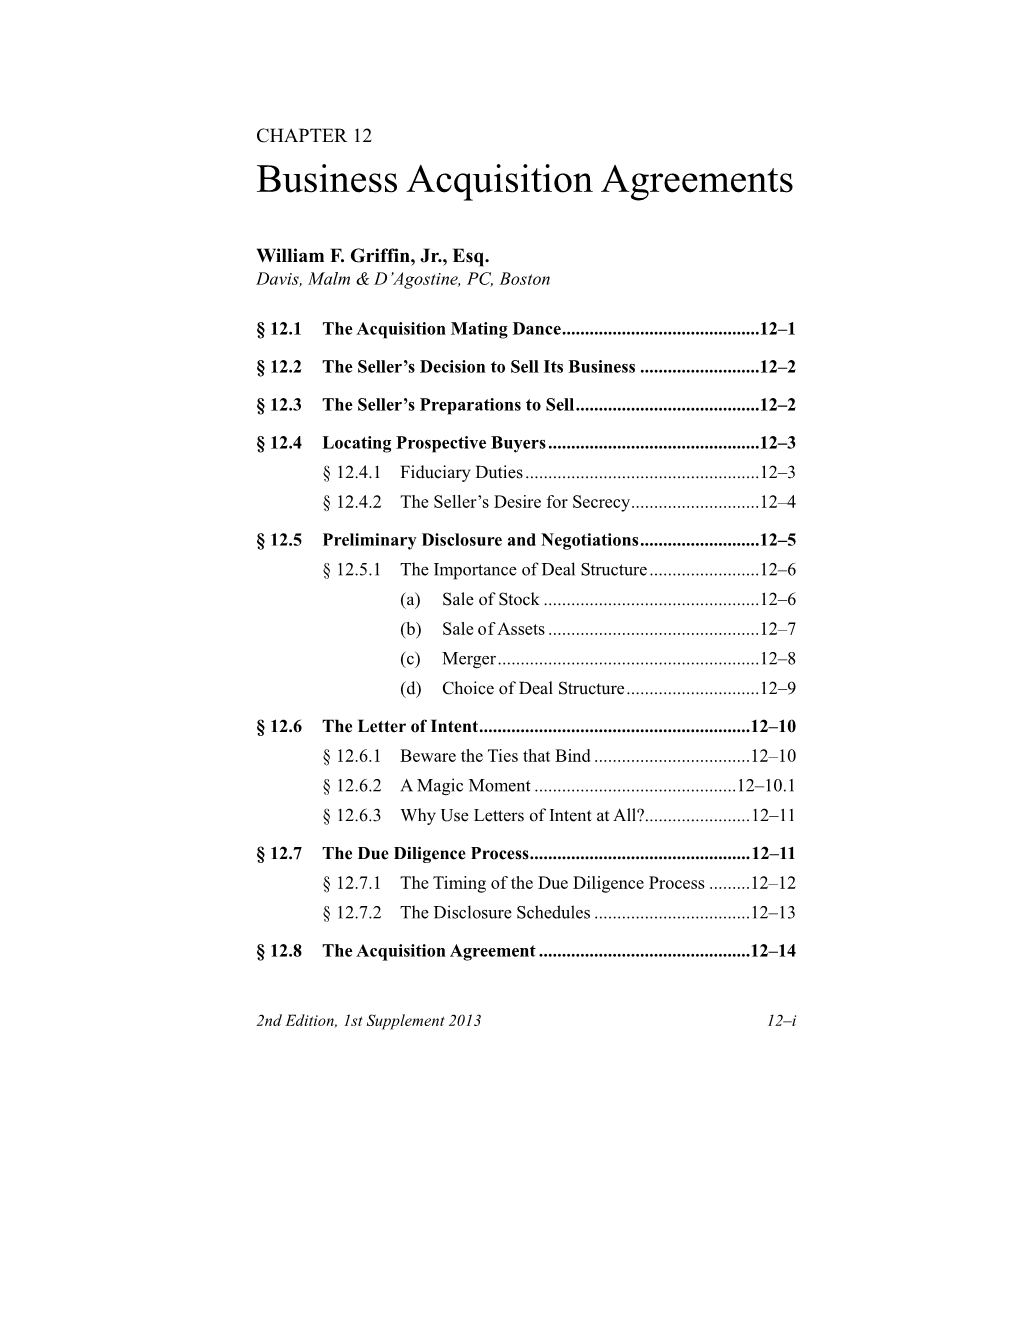 Business Aquisition Agreements